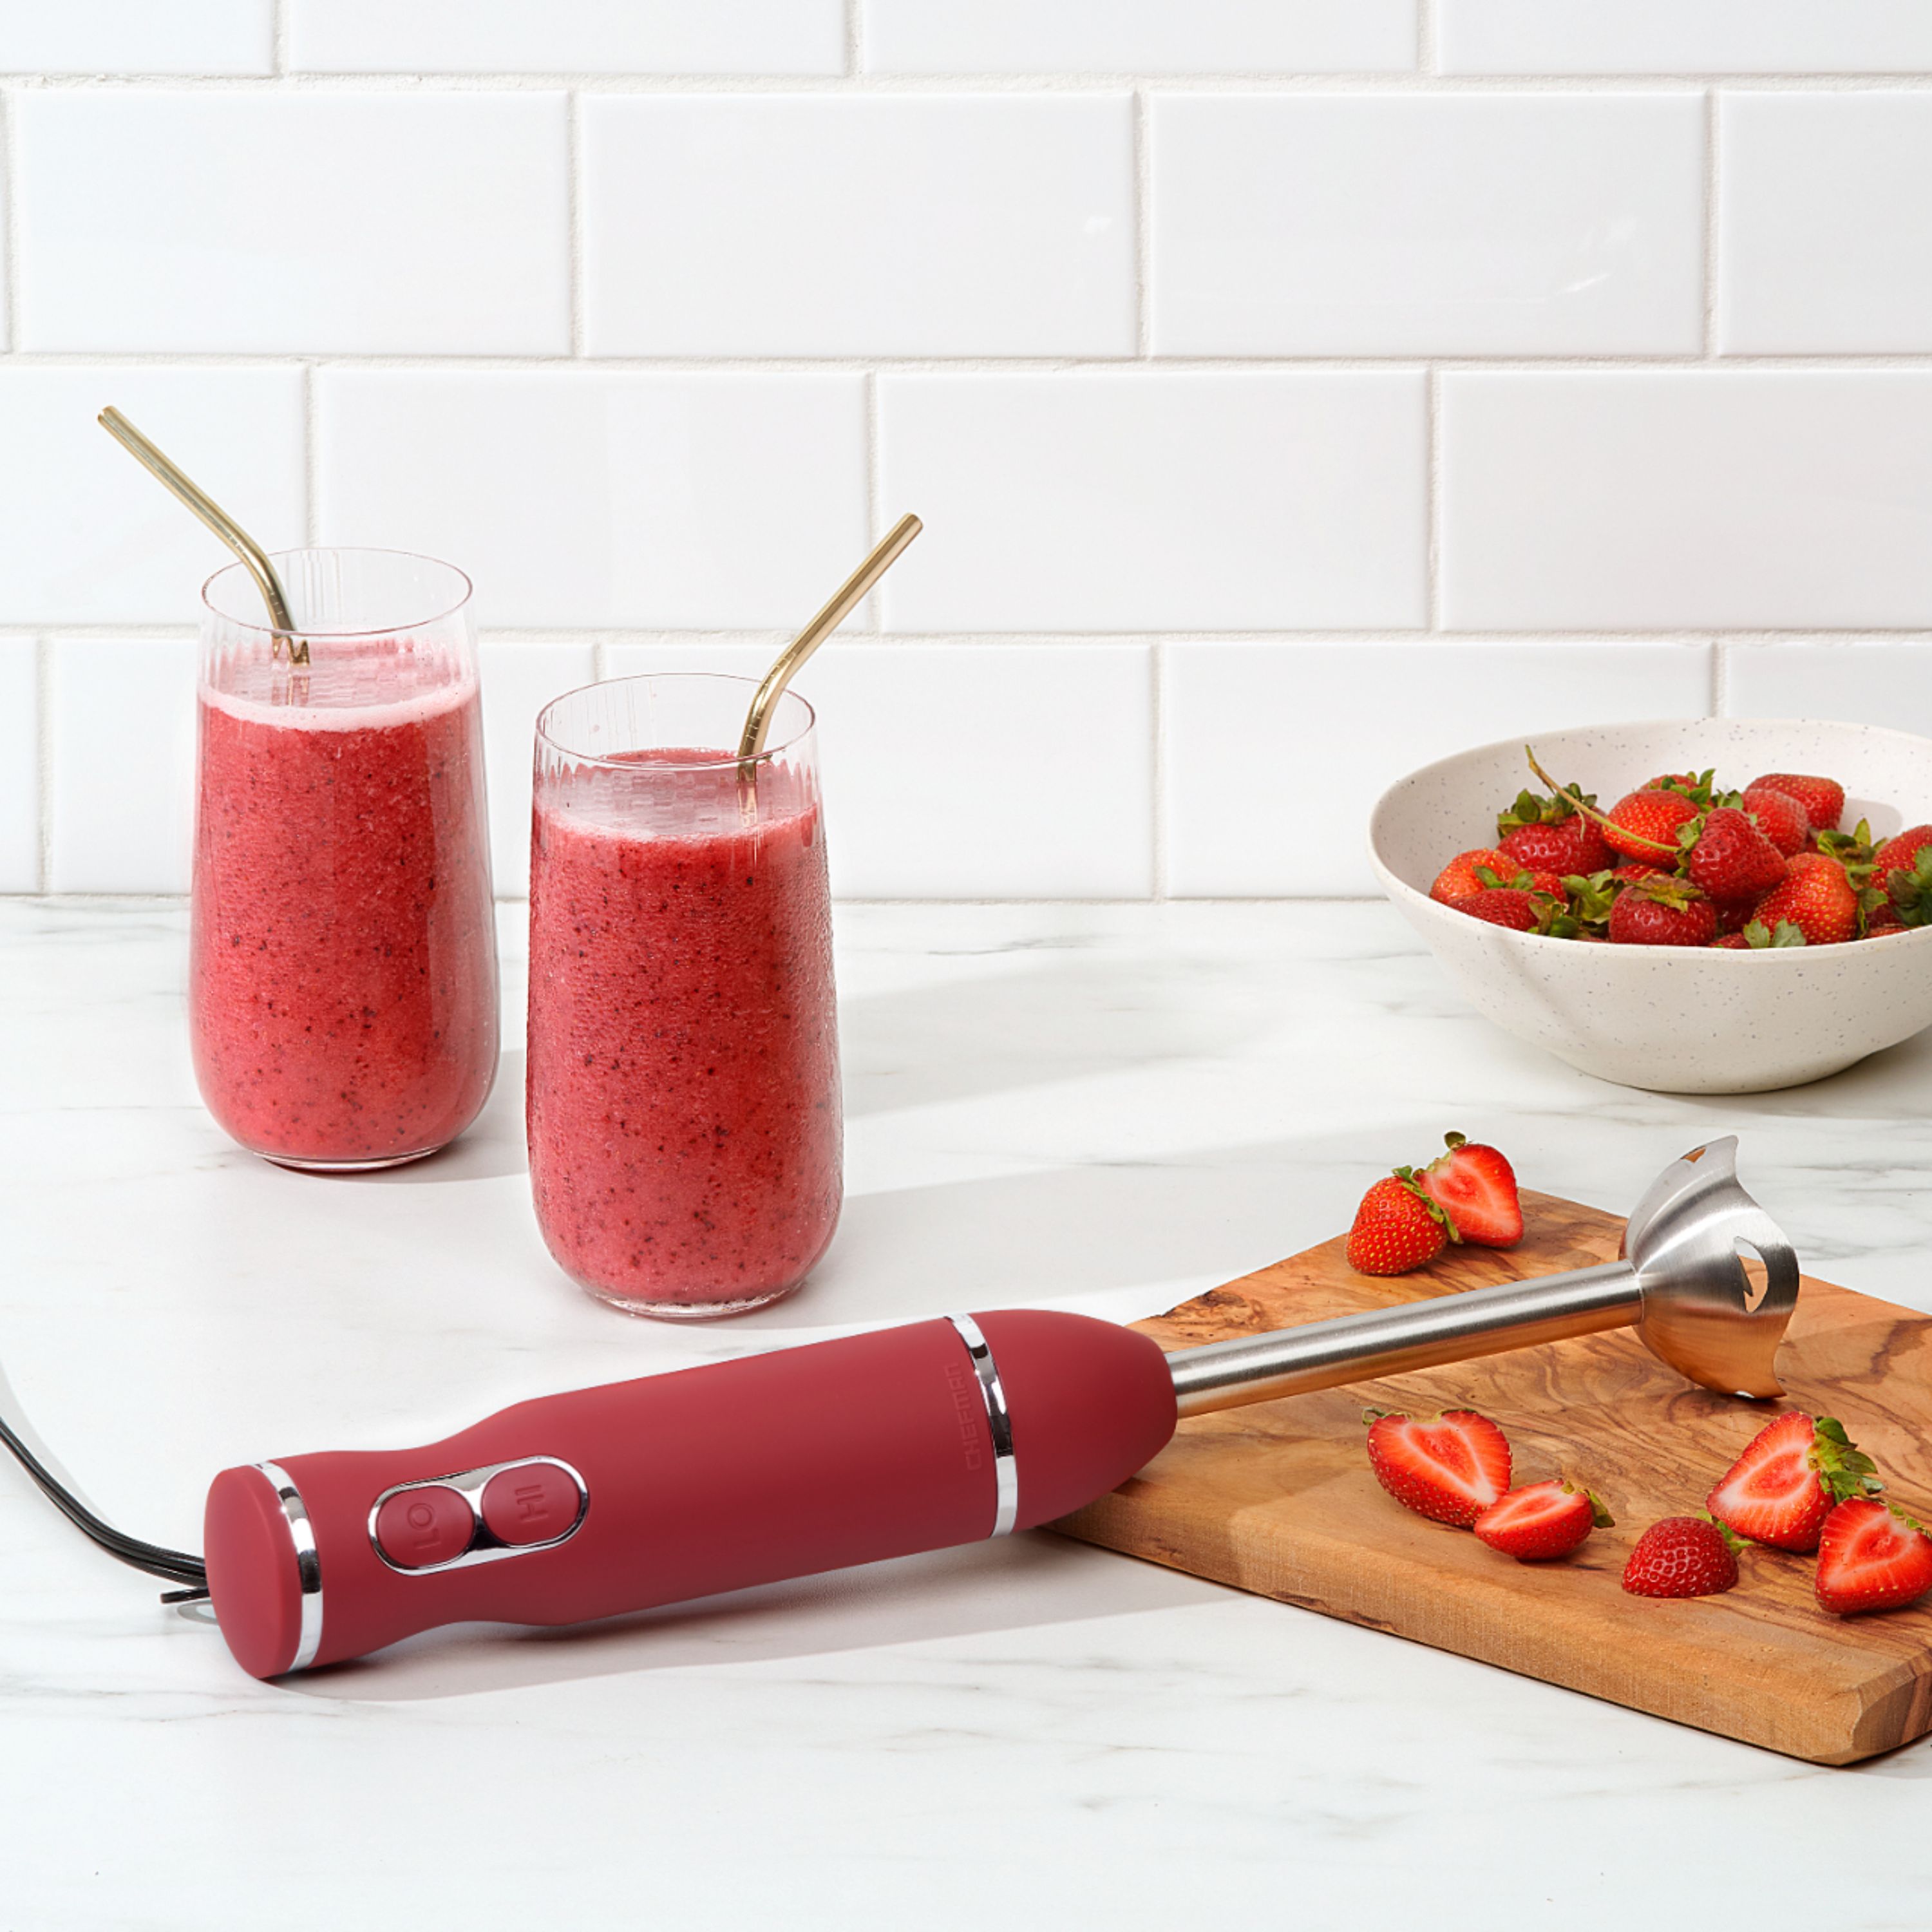 Better Chef 98575871M DualPro 2-Speed Red Handheld Immersion Blender